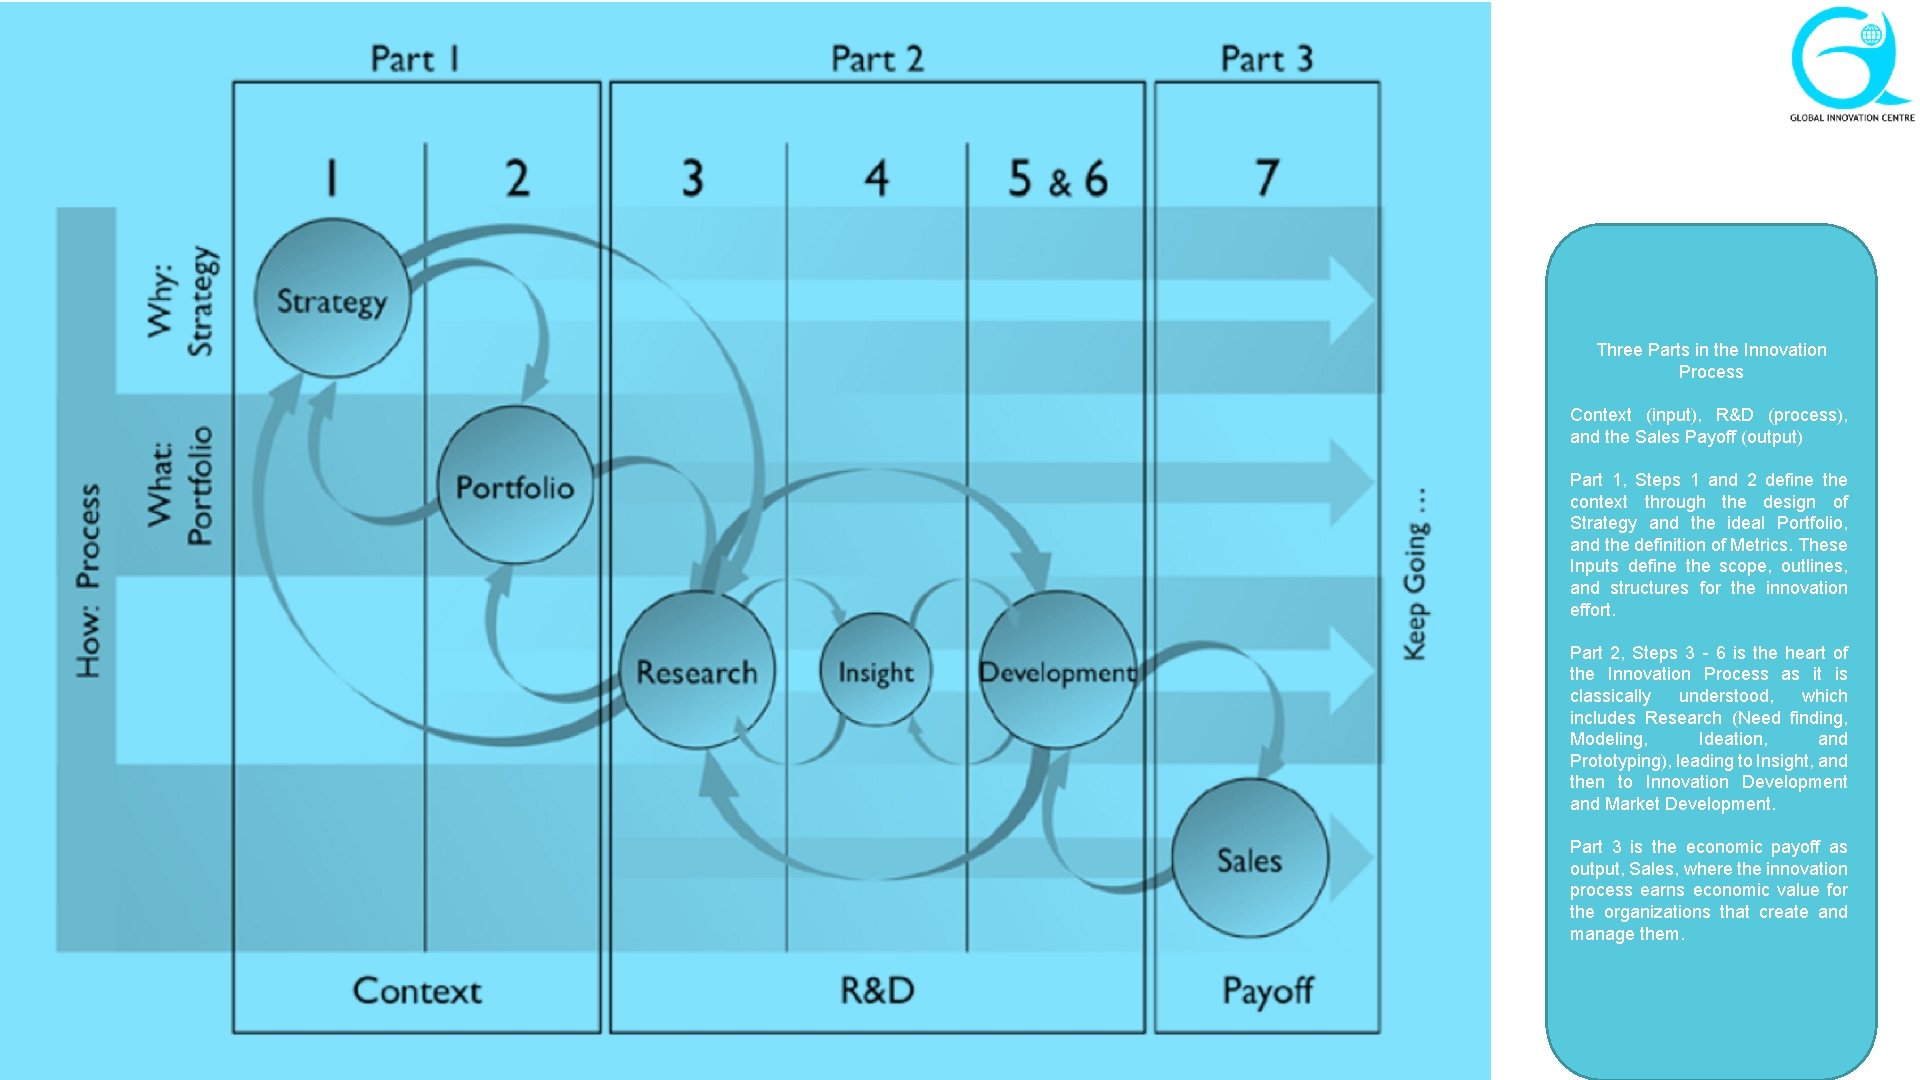 Three Parts in the Innovation Process Context (input), R&D (process), and the Sales Payoff